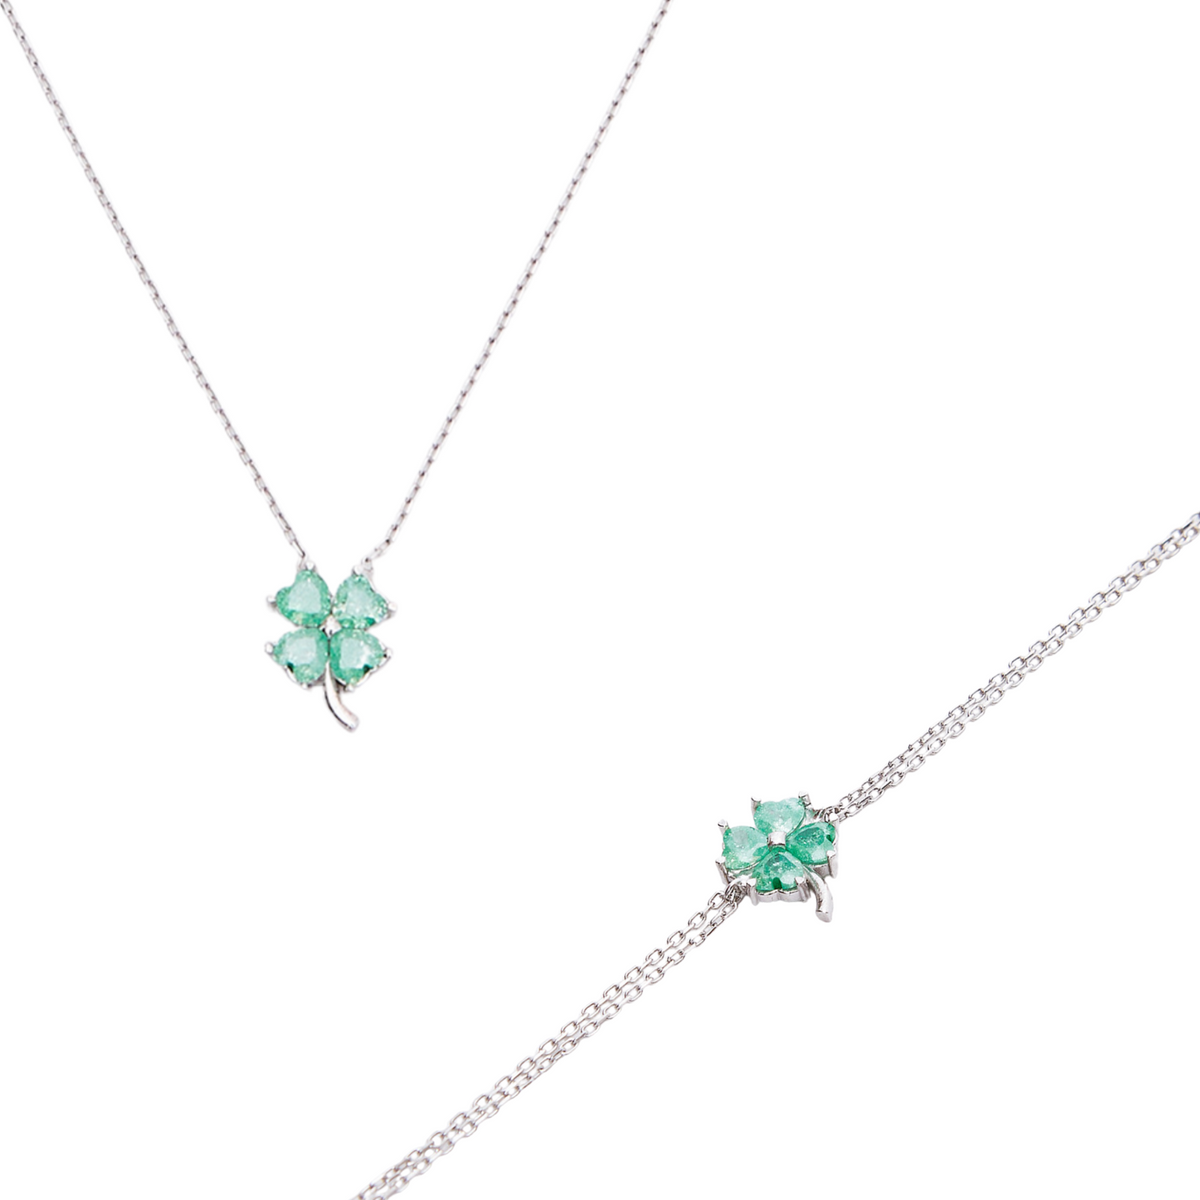 Four Leaves Clover Sterling Silver Bracelet and Necklace Set in Green